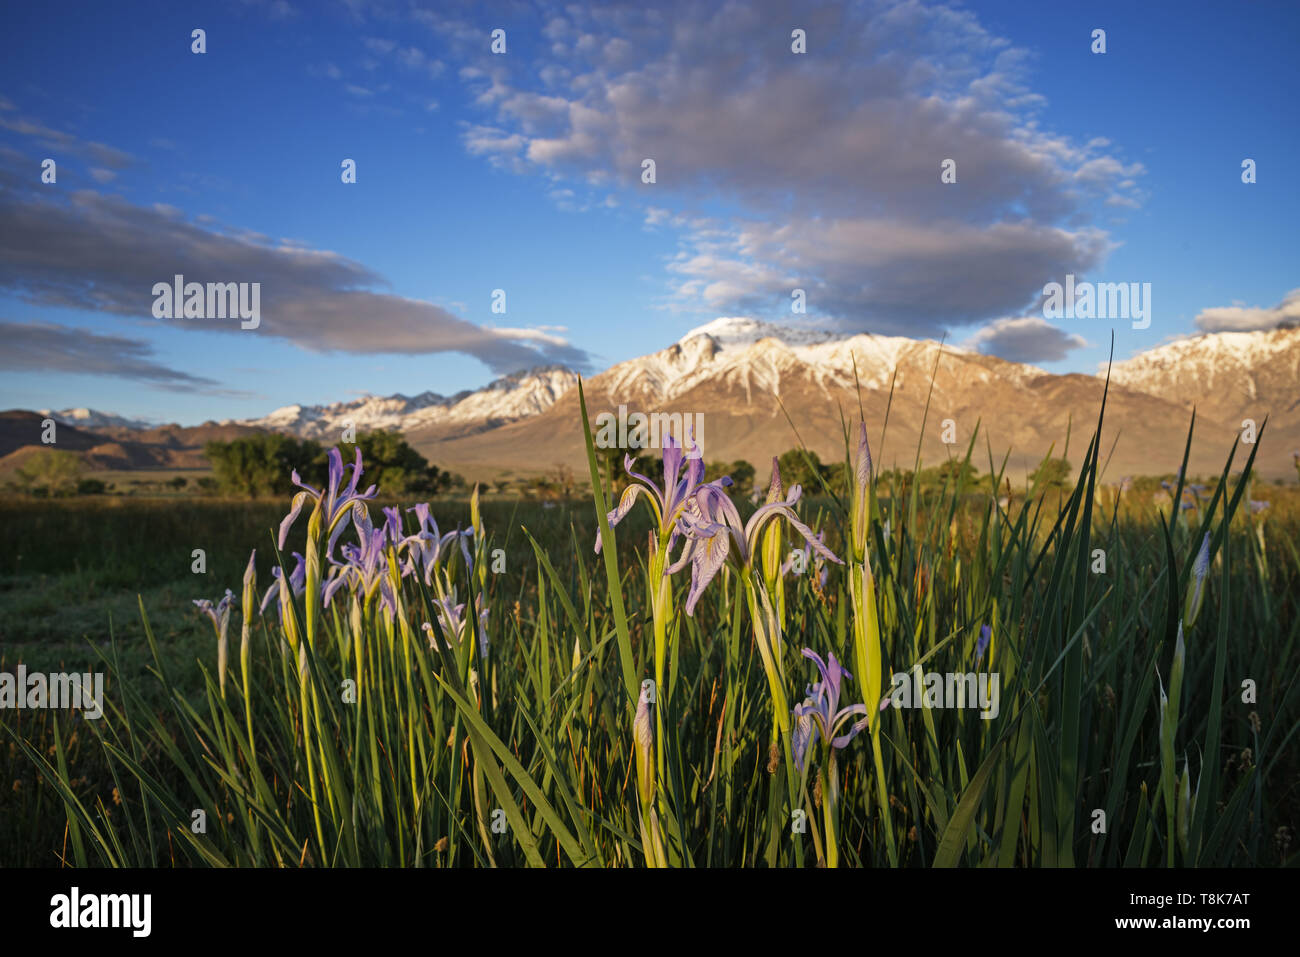 wild iris flowers in a meadow below mountain with selective focus on flowers Stock Photo